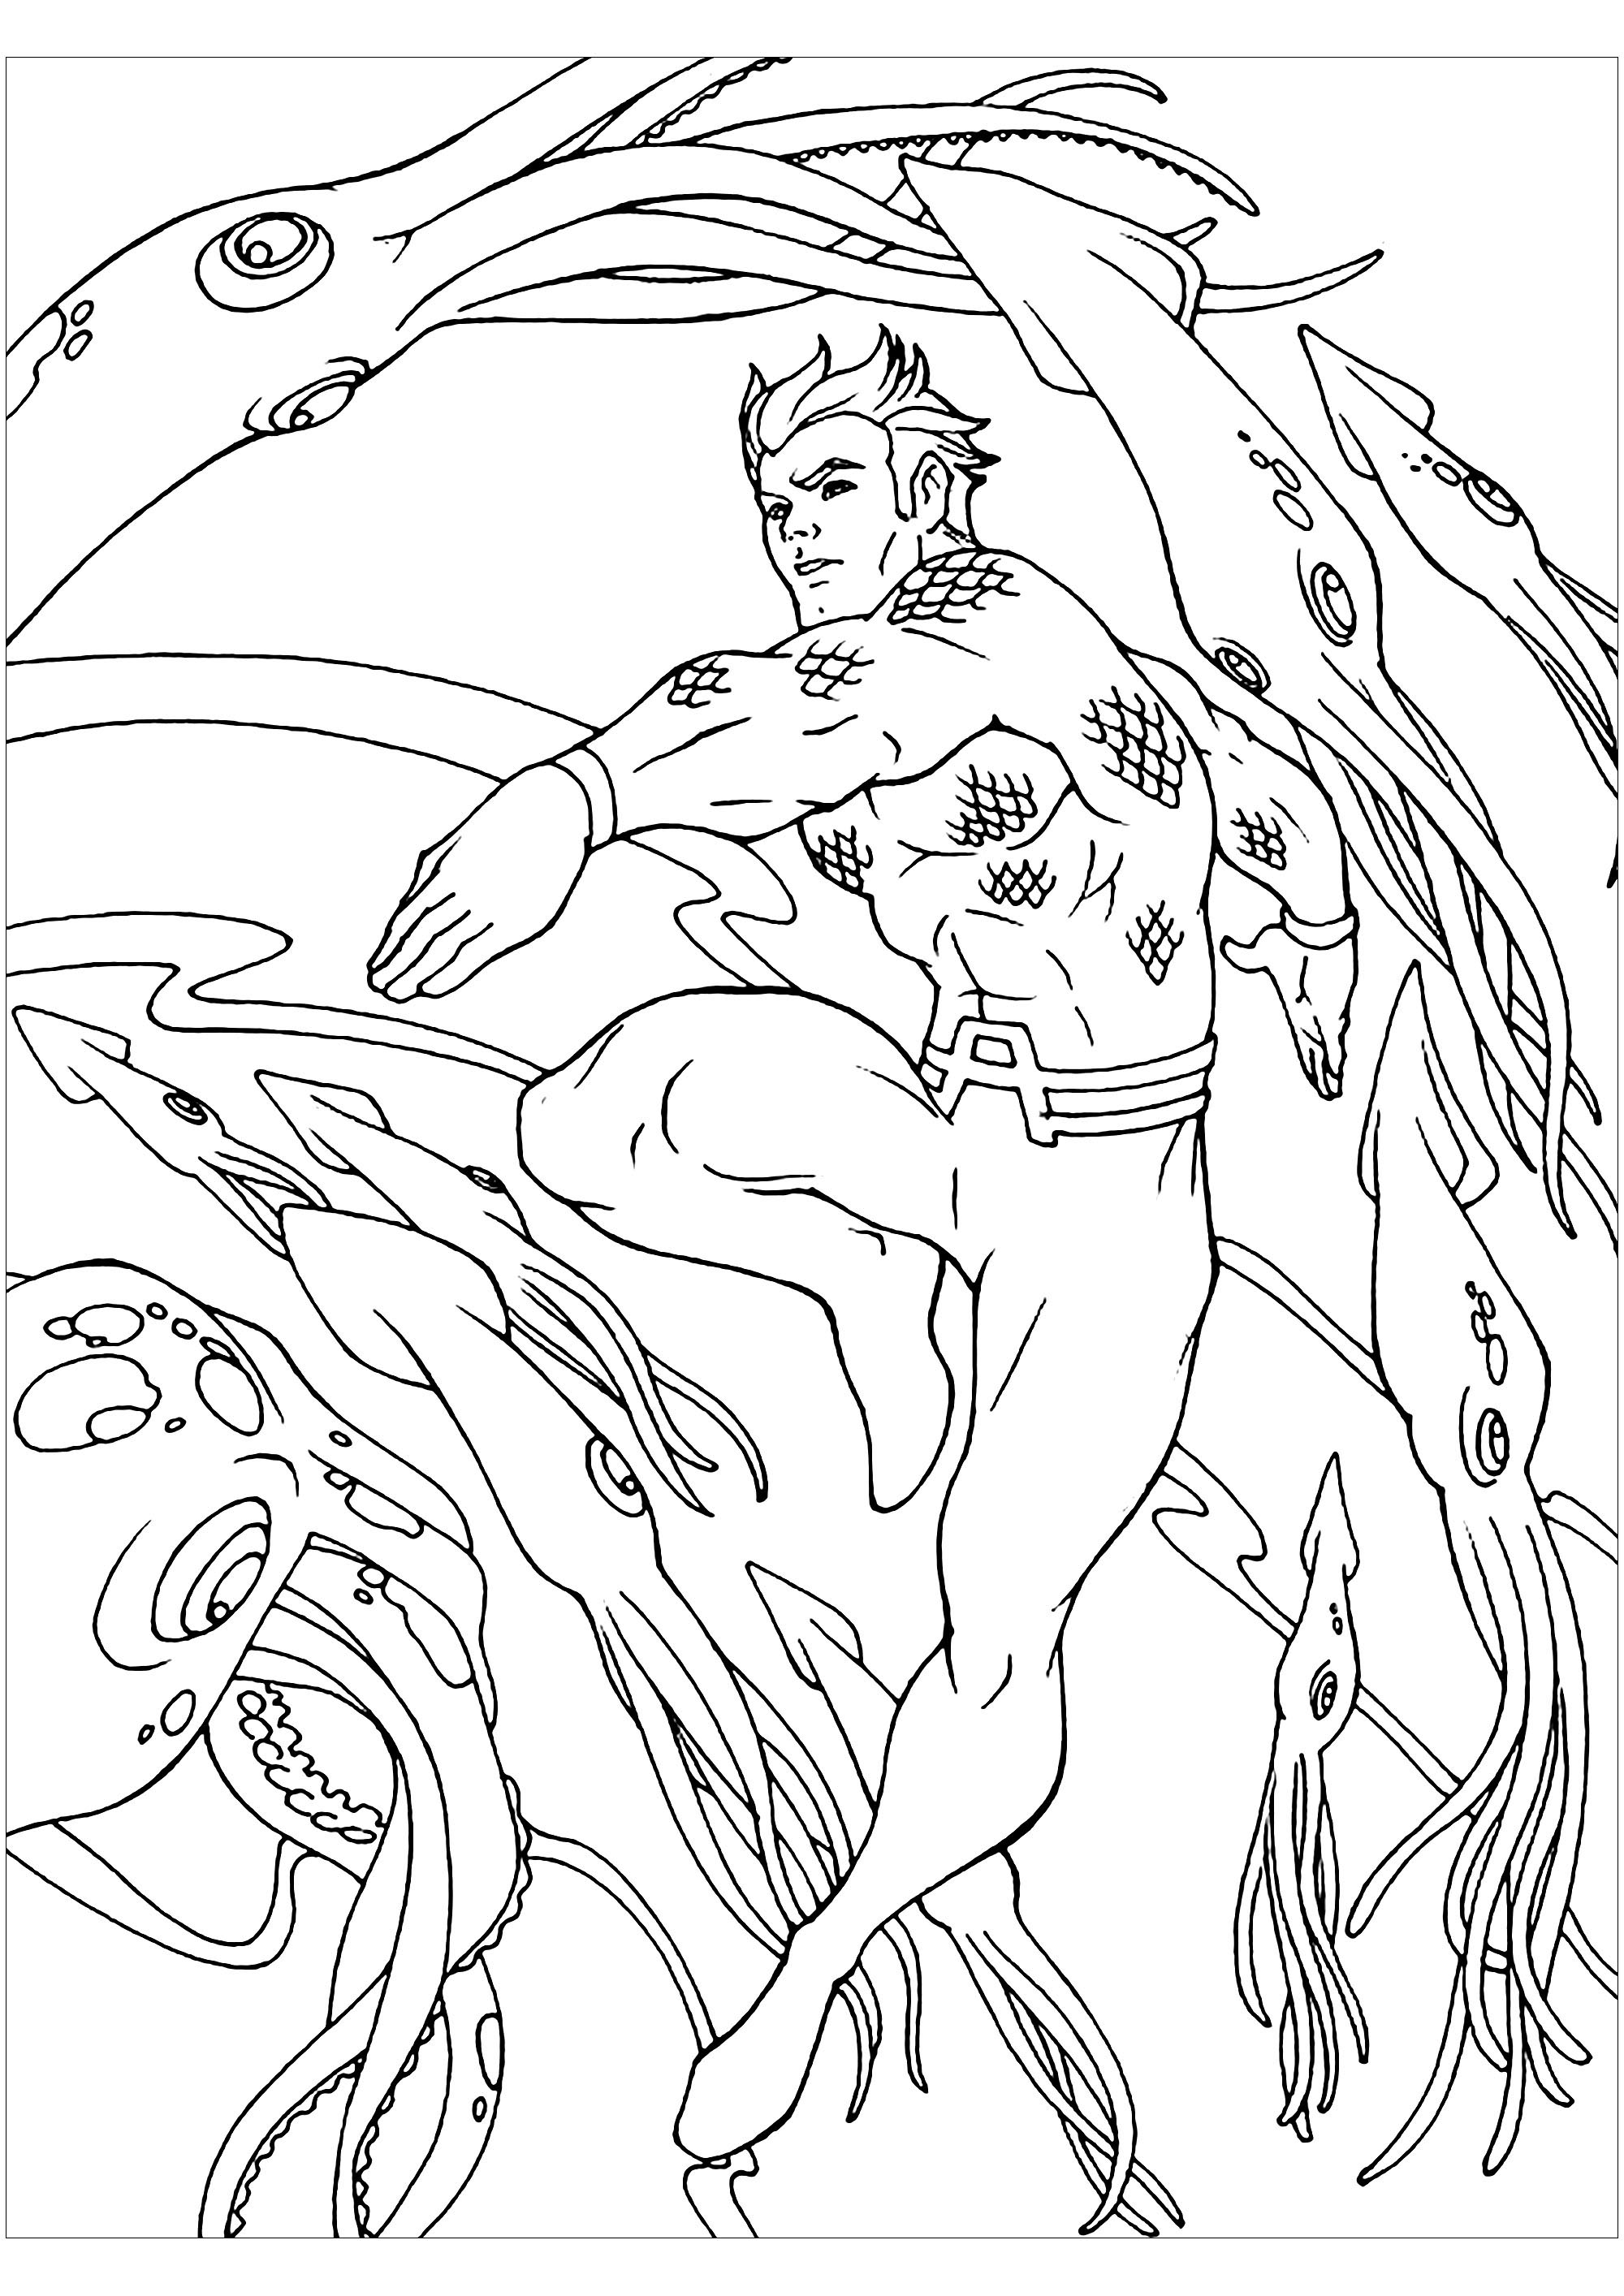 Simple Aquaman coloring page to print and color for free